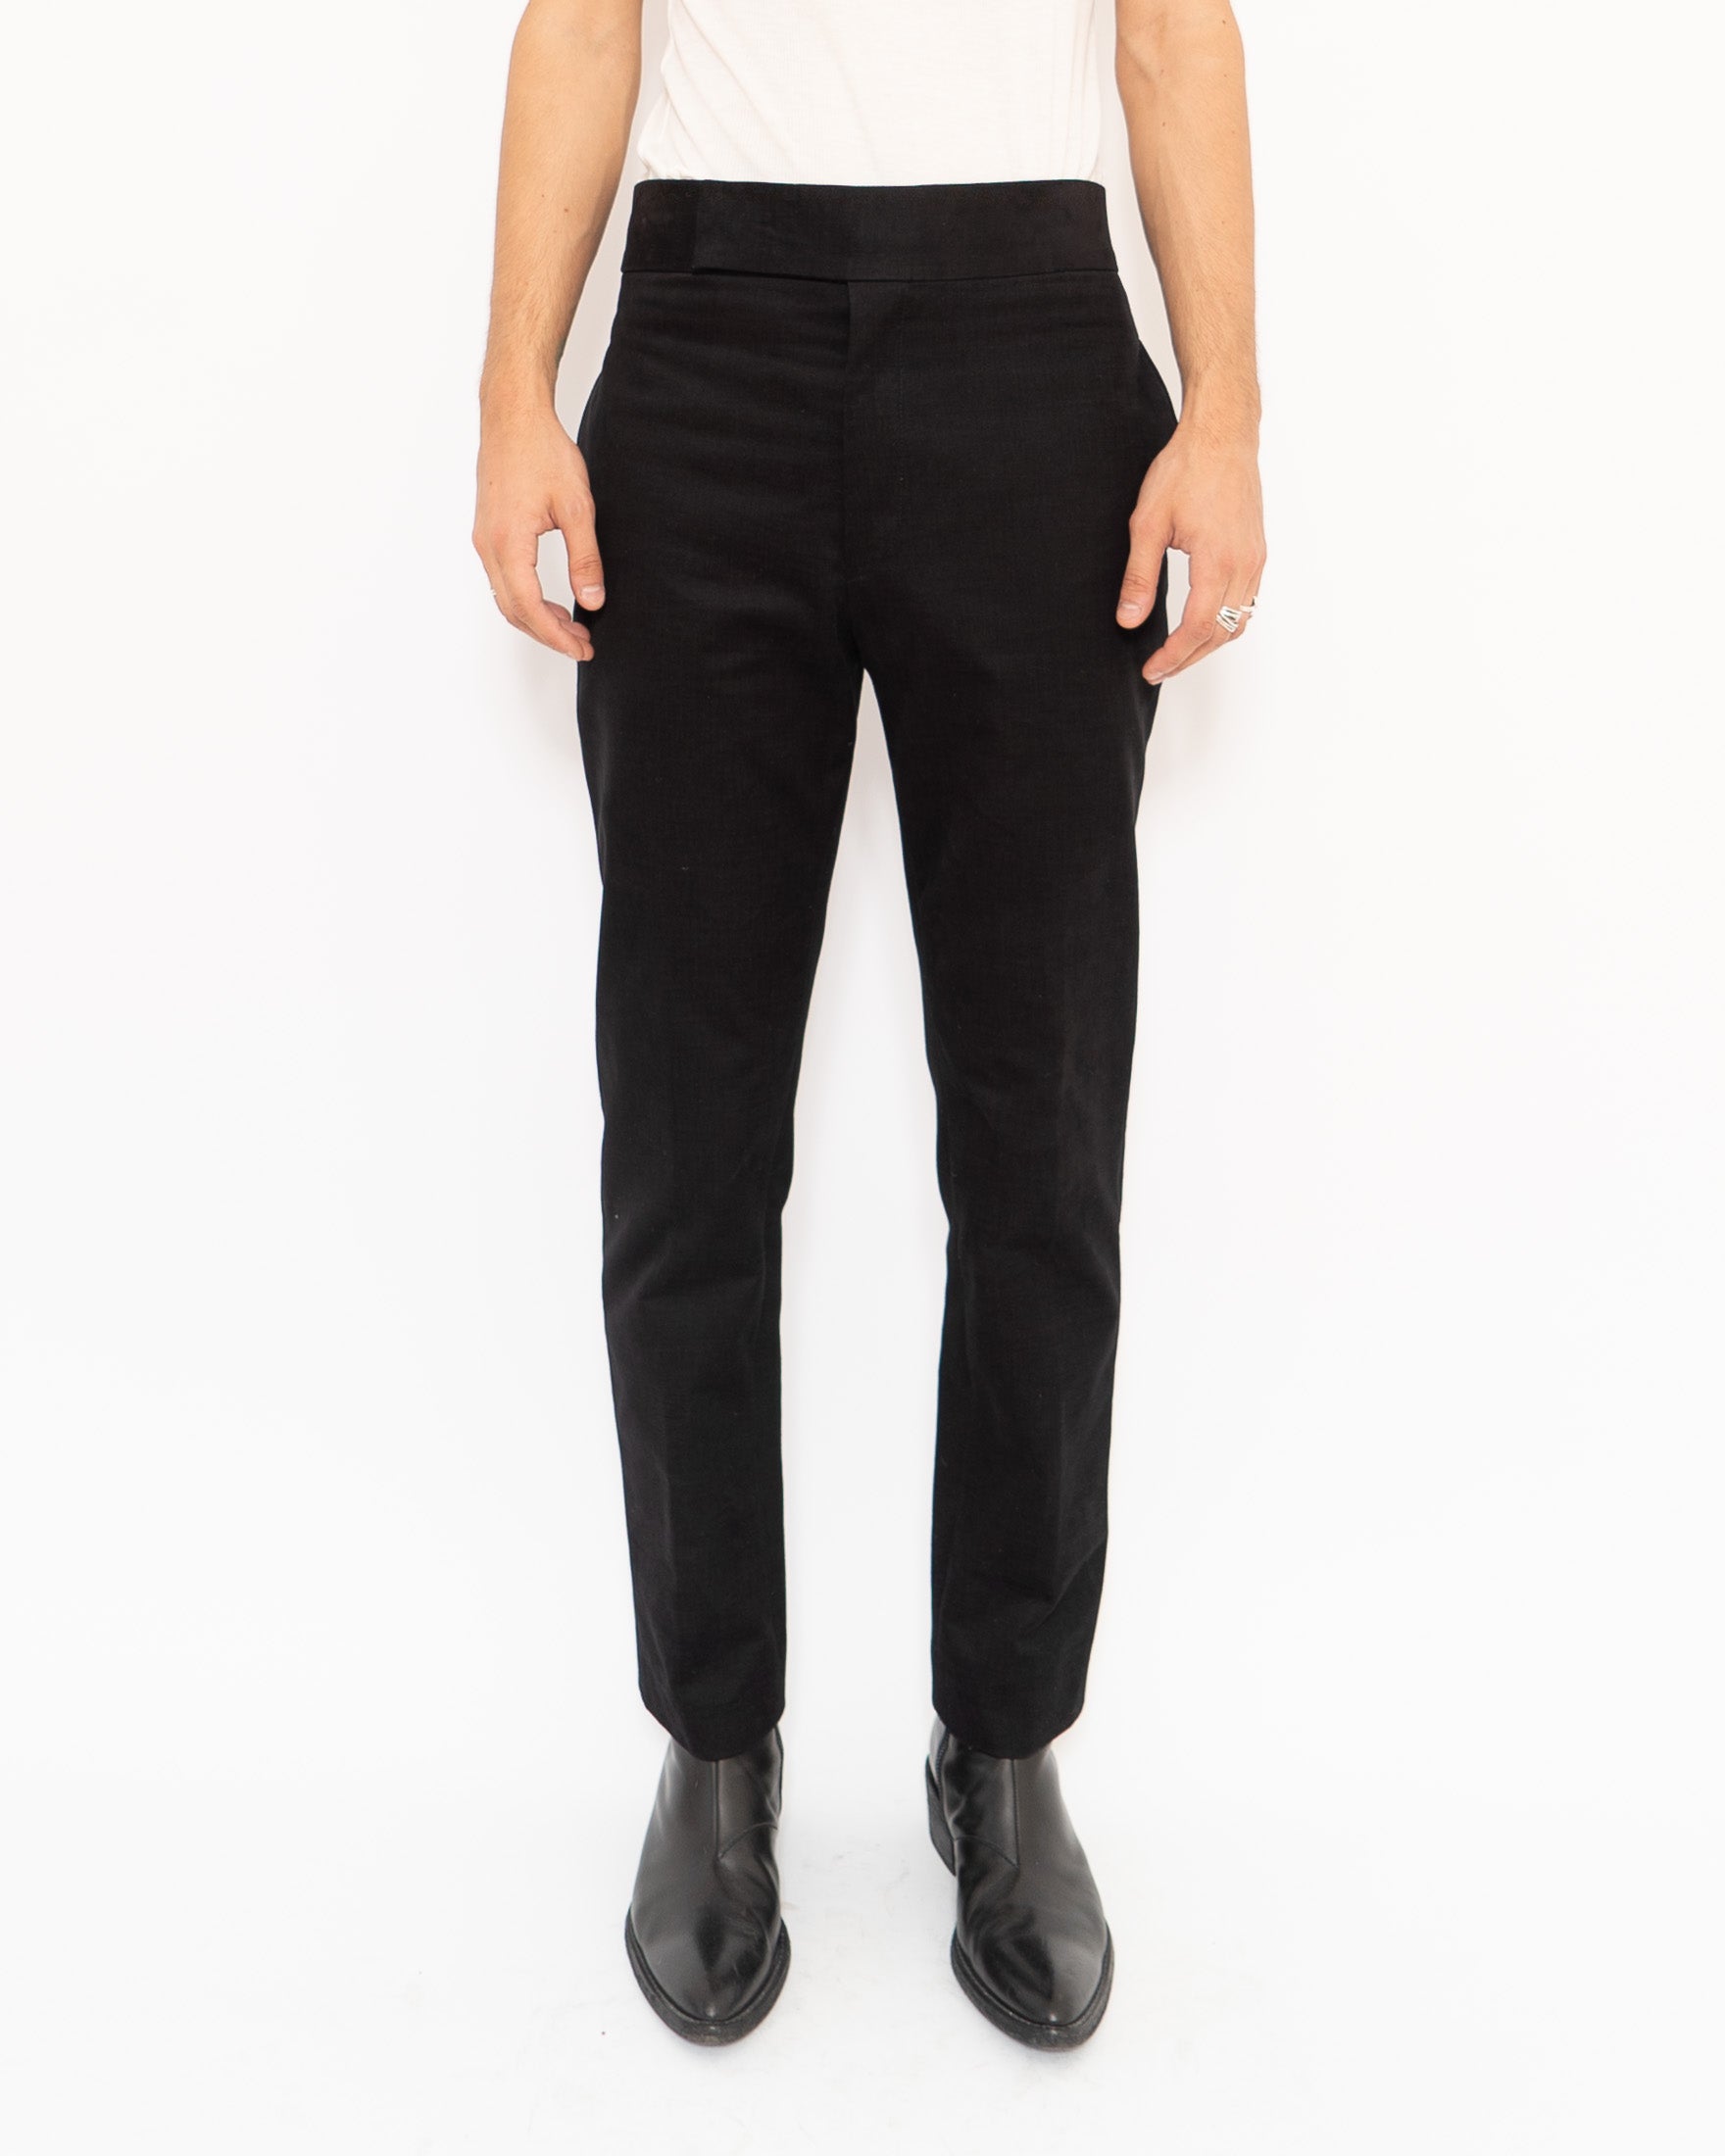 FW20 Beaumont Black Trousers Sample